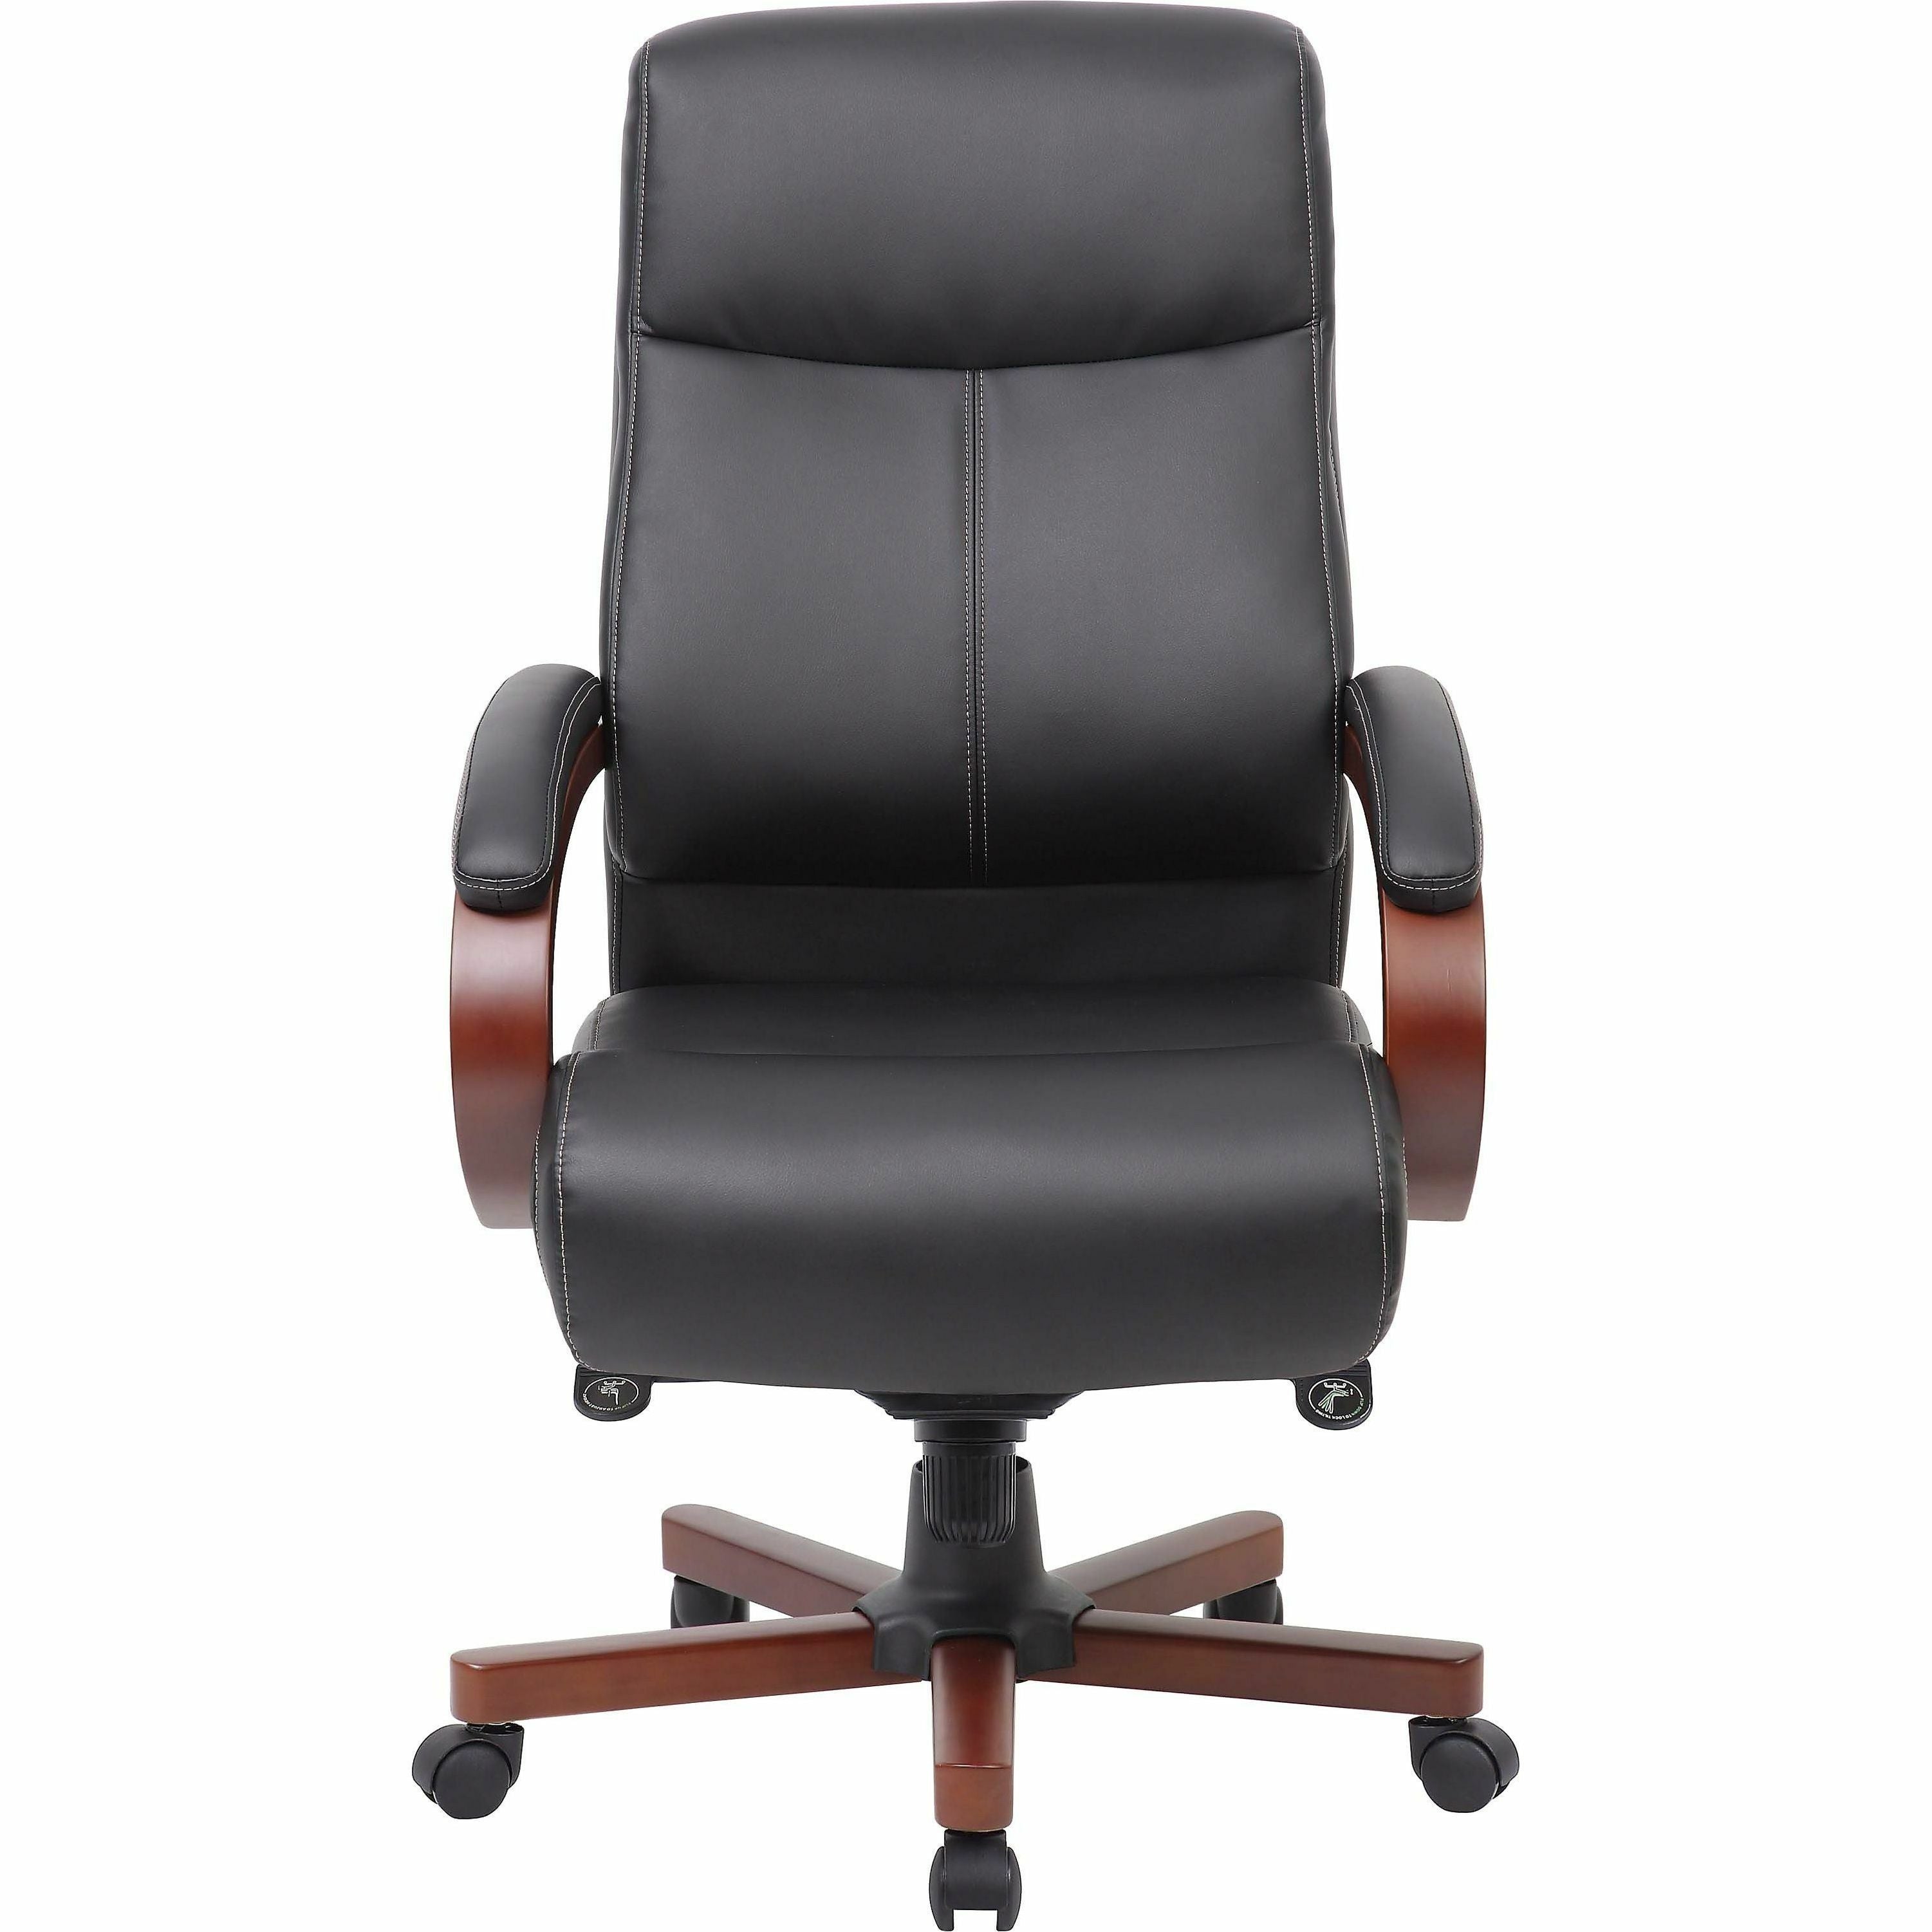 lorell-executive-high-back-wood-finish-office-chair-black-bonded-leather-seat-black-bonded-leather-back-high-back-black-mahogany-1-each_llr69532 - 2